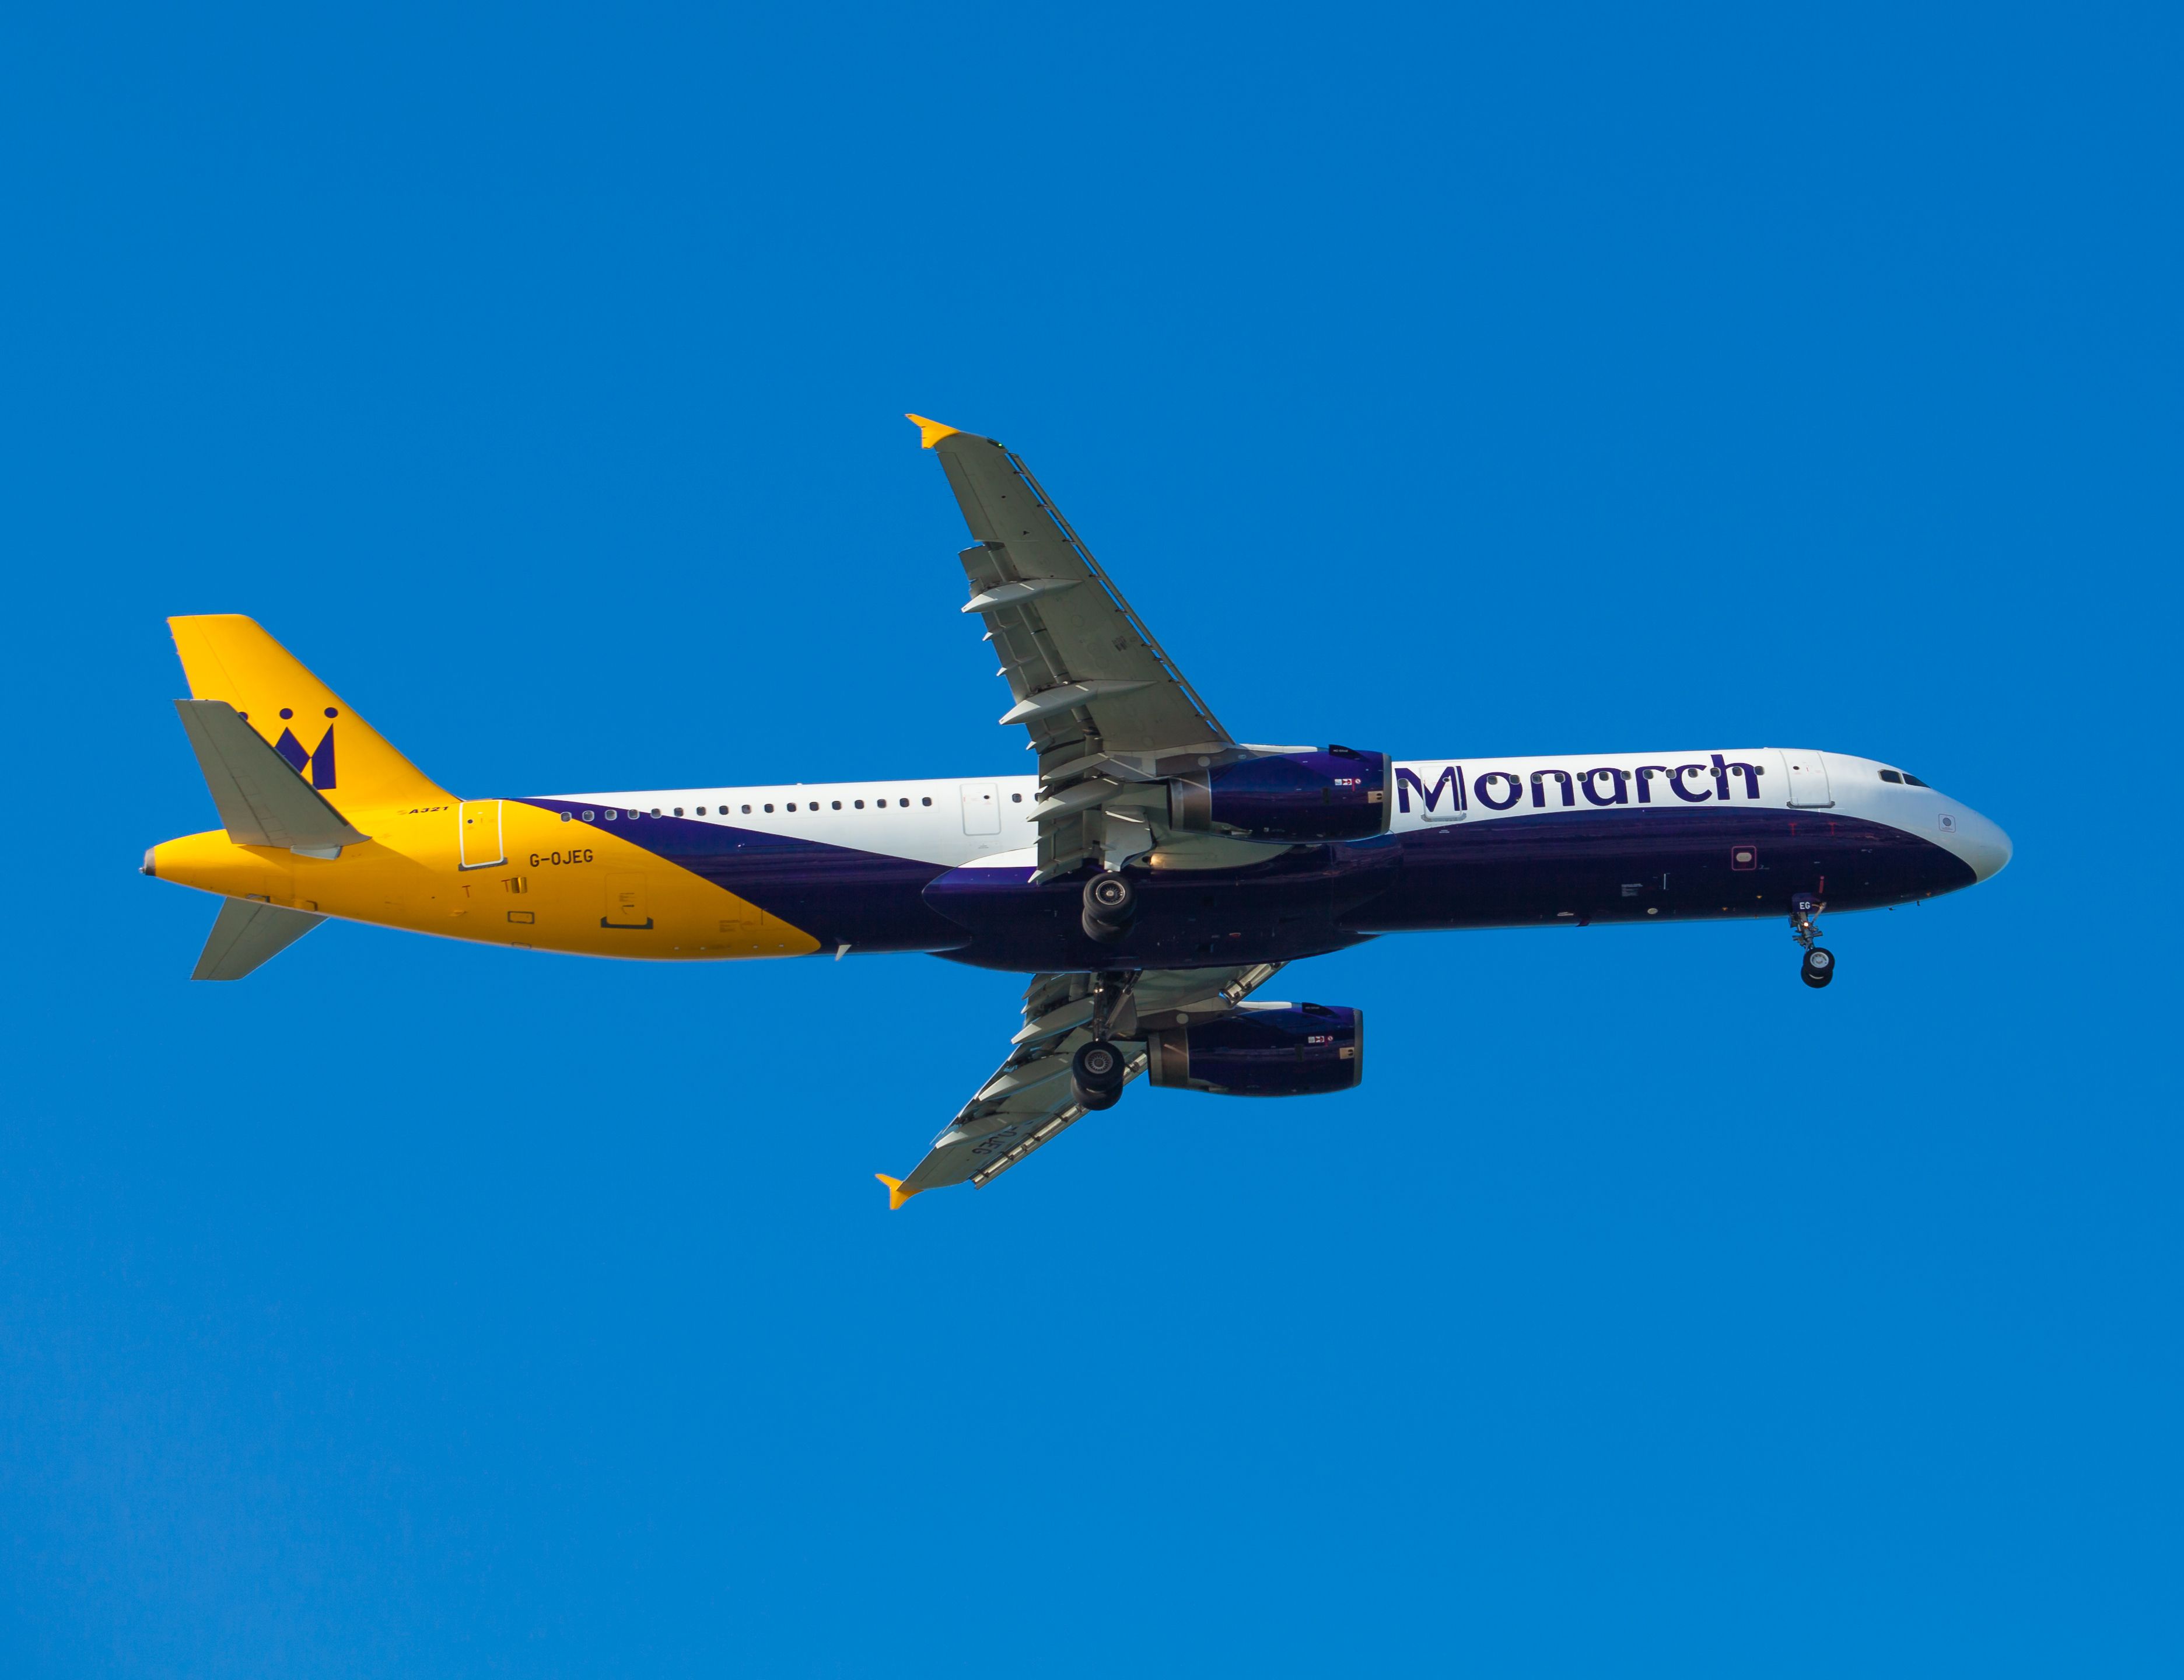 A Monarch aircraft flying in the sky.